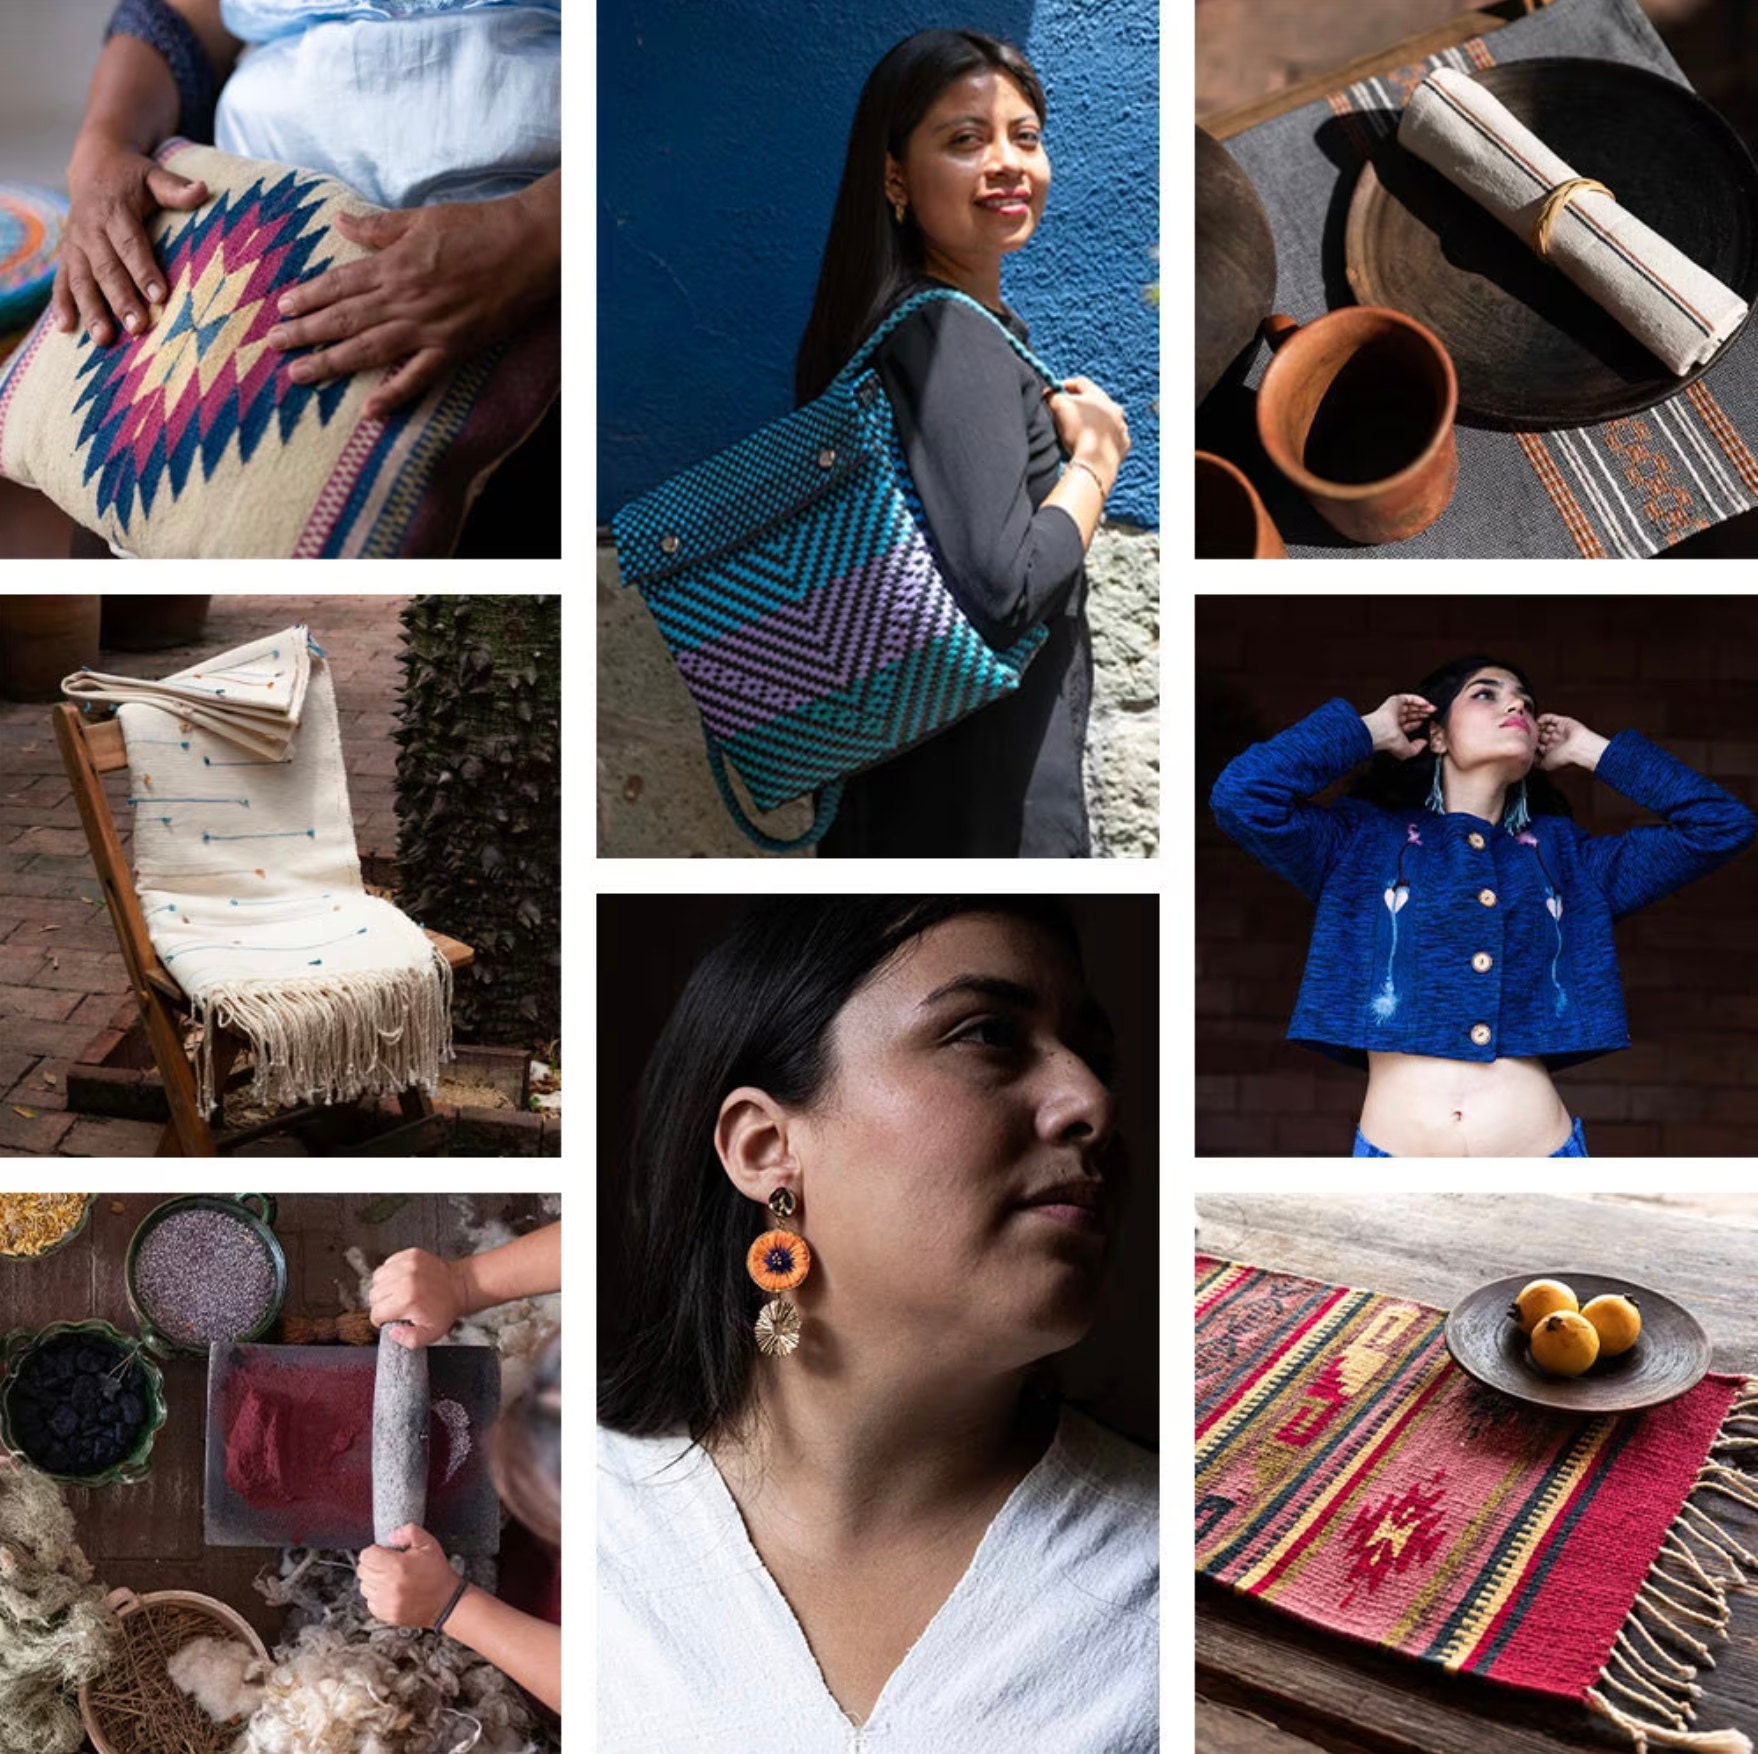 A colourful array of handwoven textiles and items made by artisans in Oaxaca